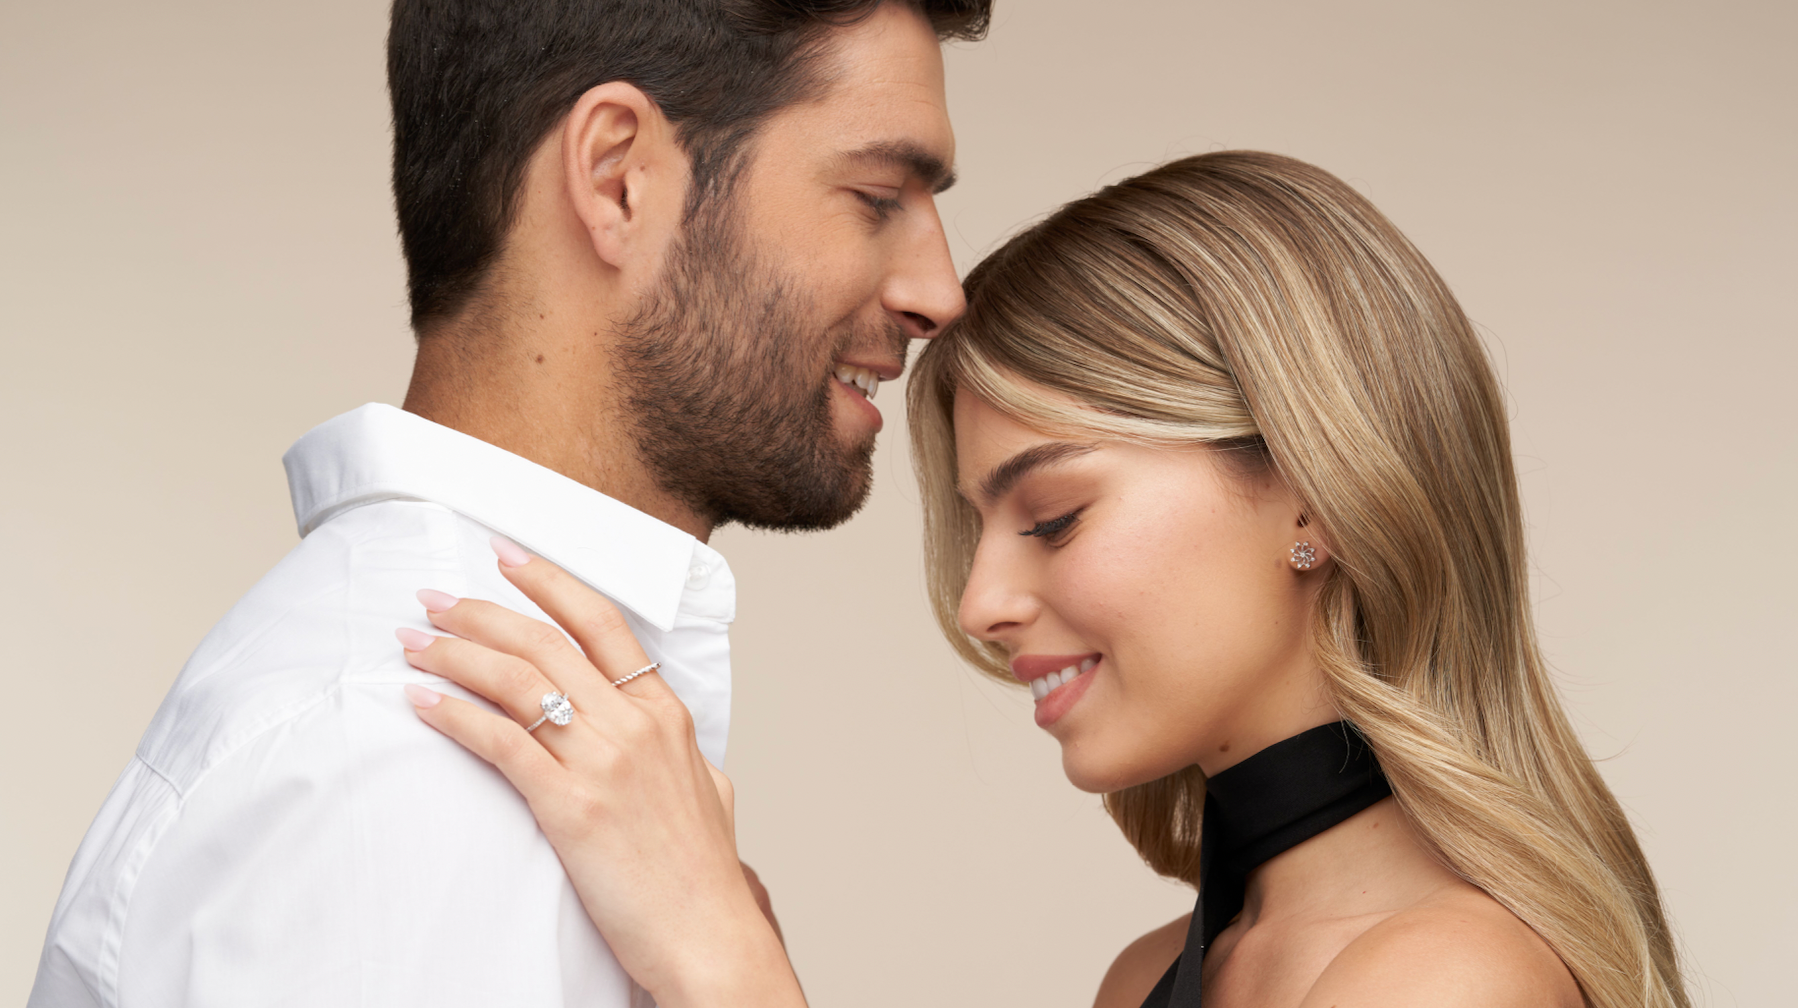 A Match Made in Heaven: Jewelry Gifts for Him and Her